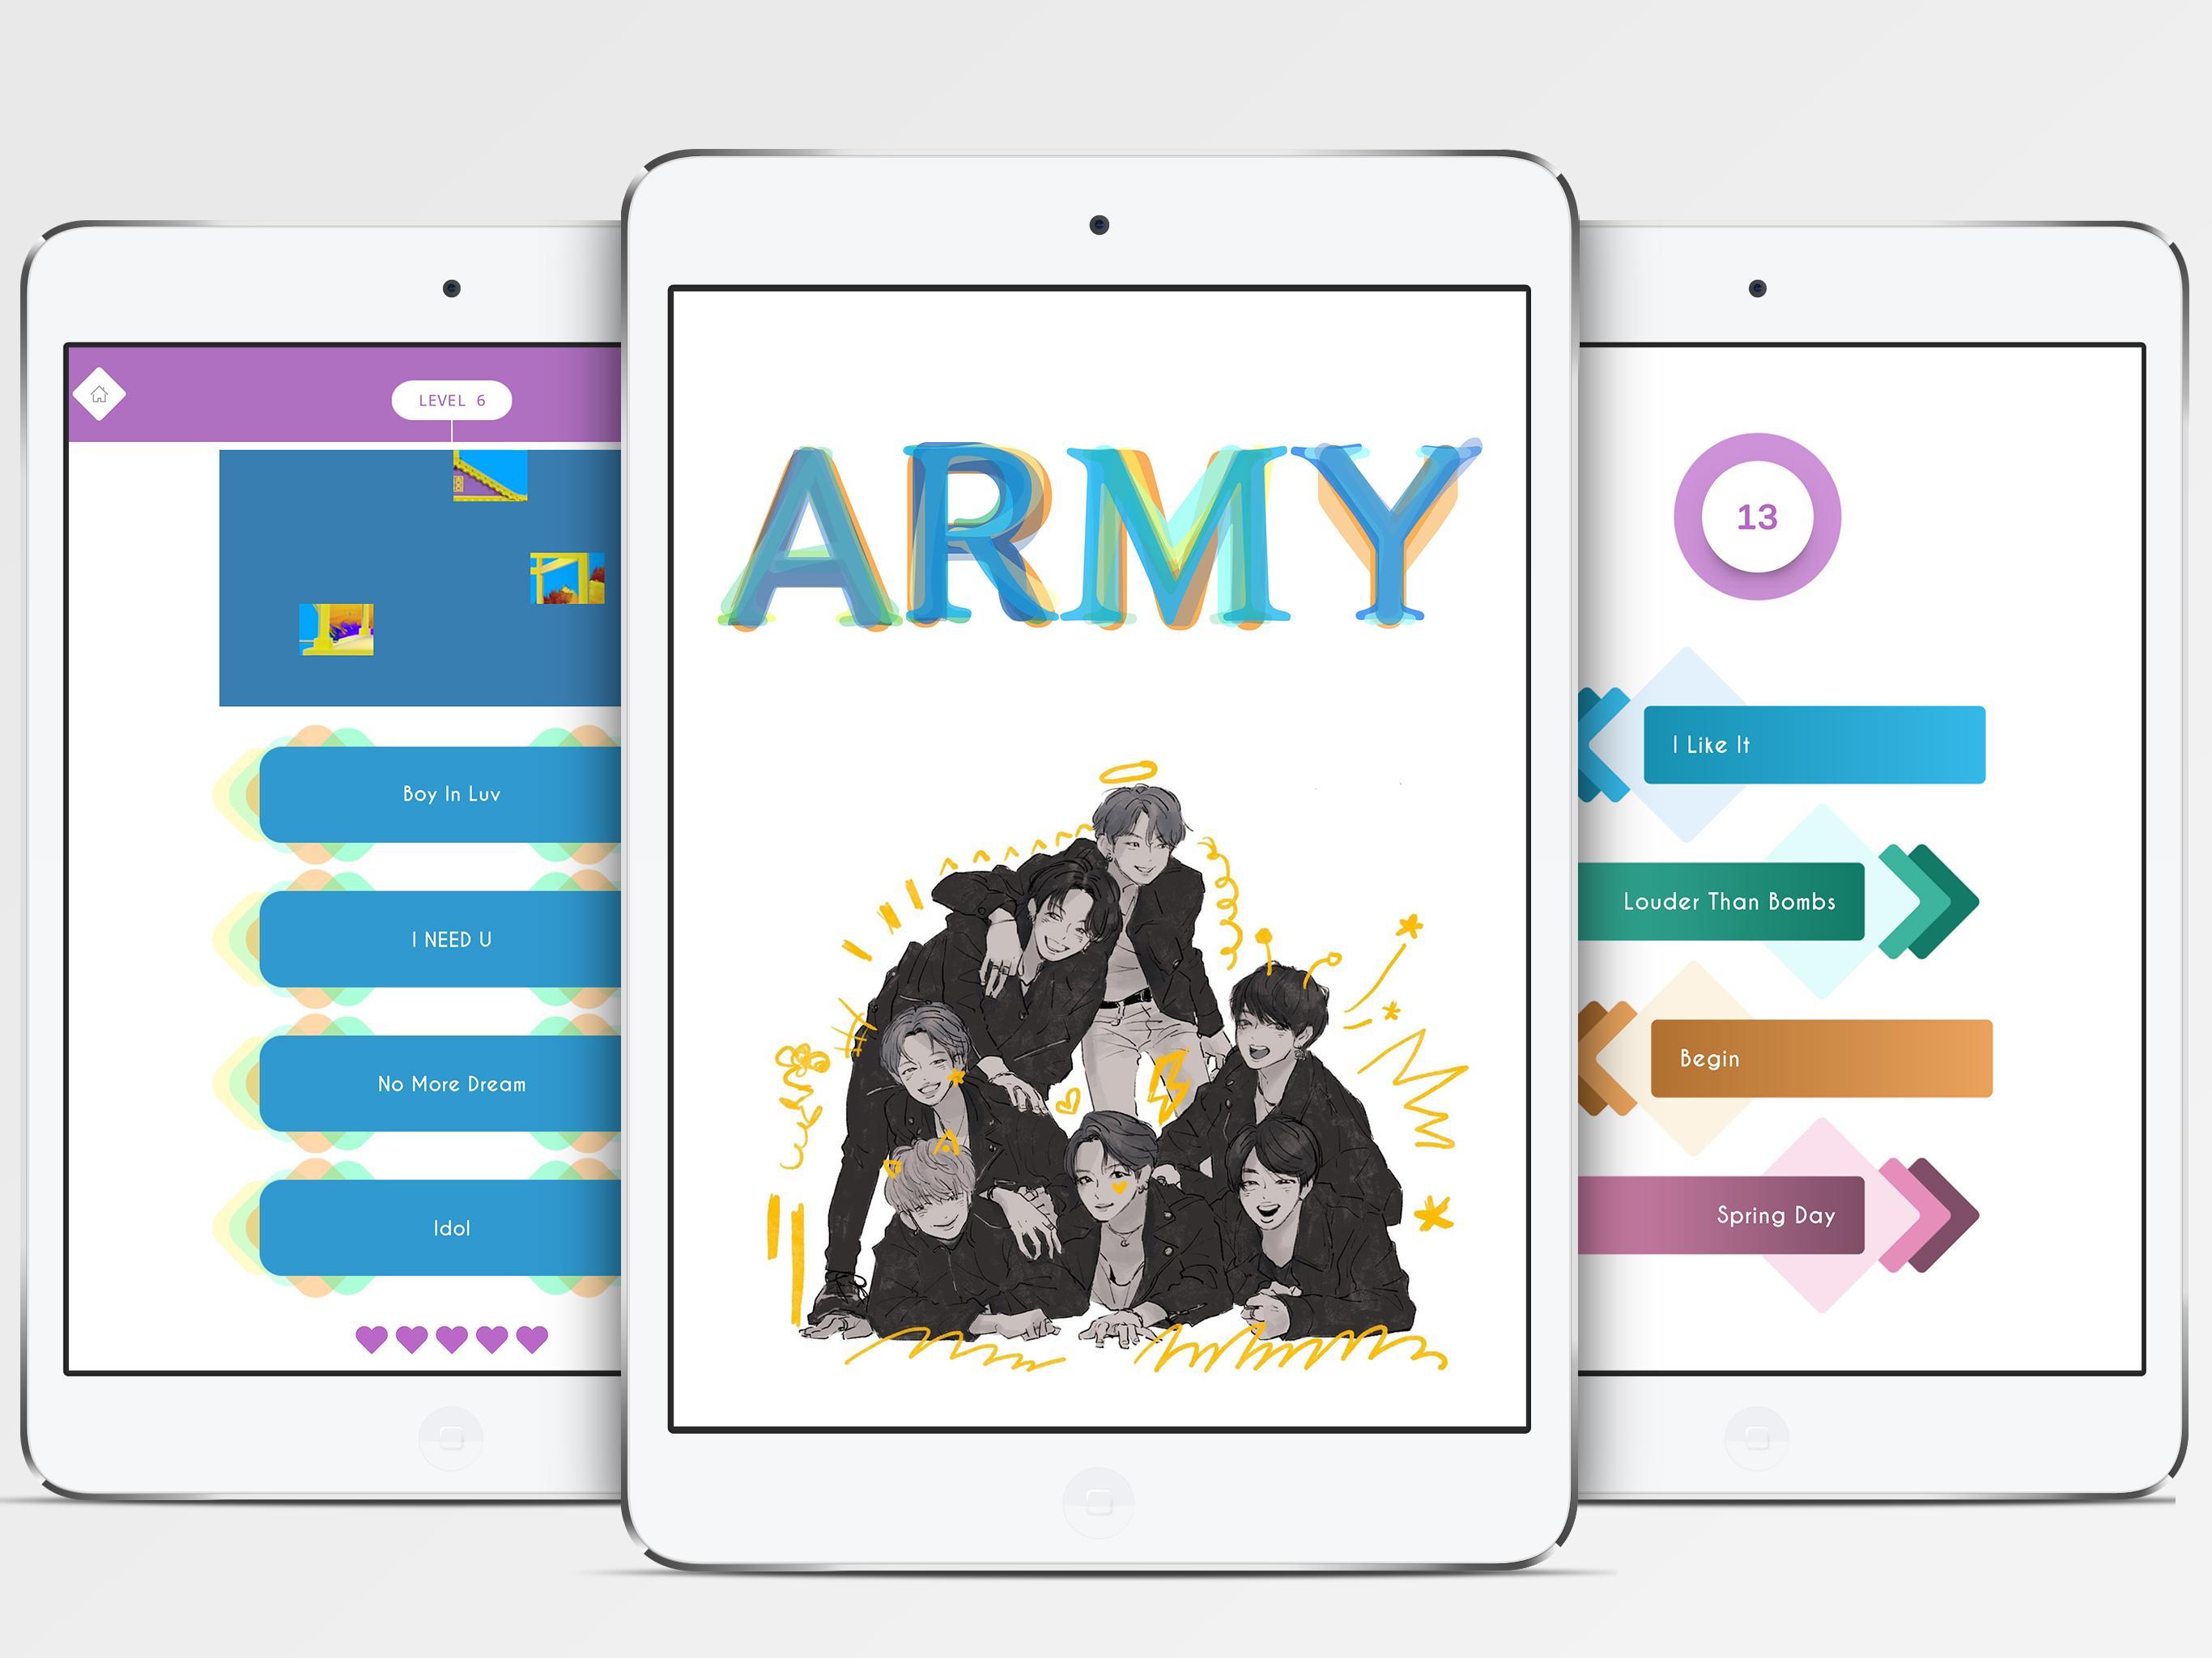 A R M Y Game For Bts For Android Apk Download - jogo no roblox do bts